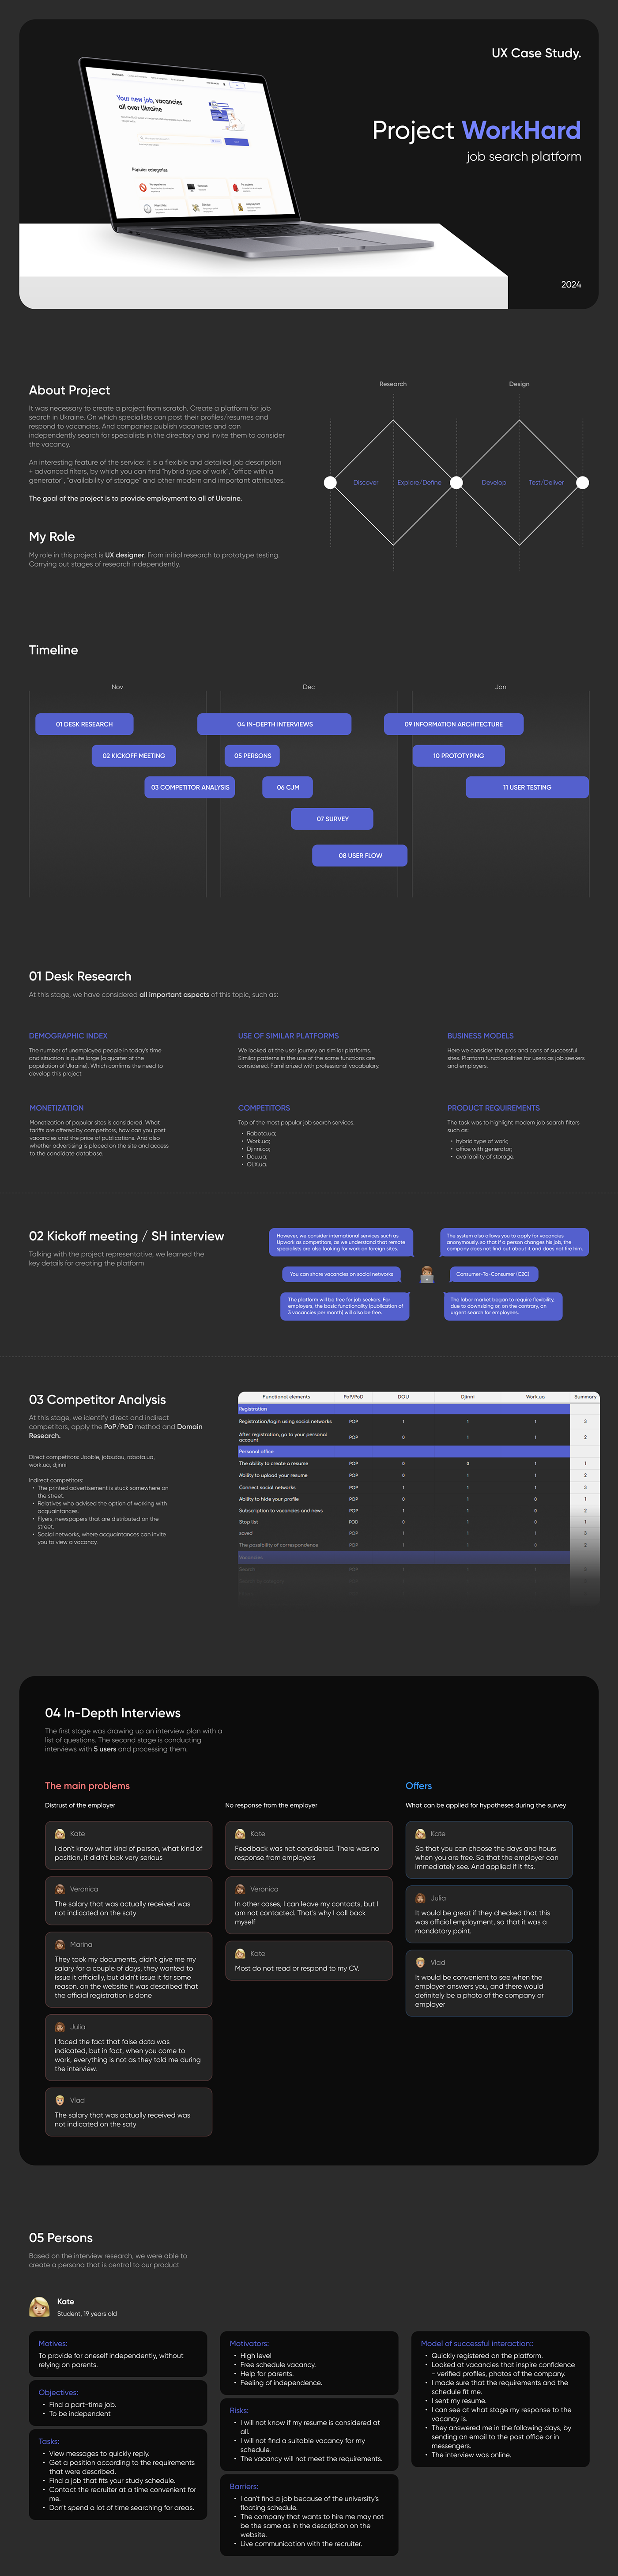 ux site UI/UX Figma Job Search prototype interview person user flow user testing